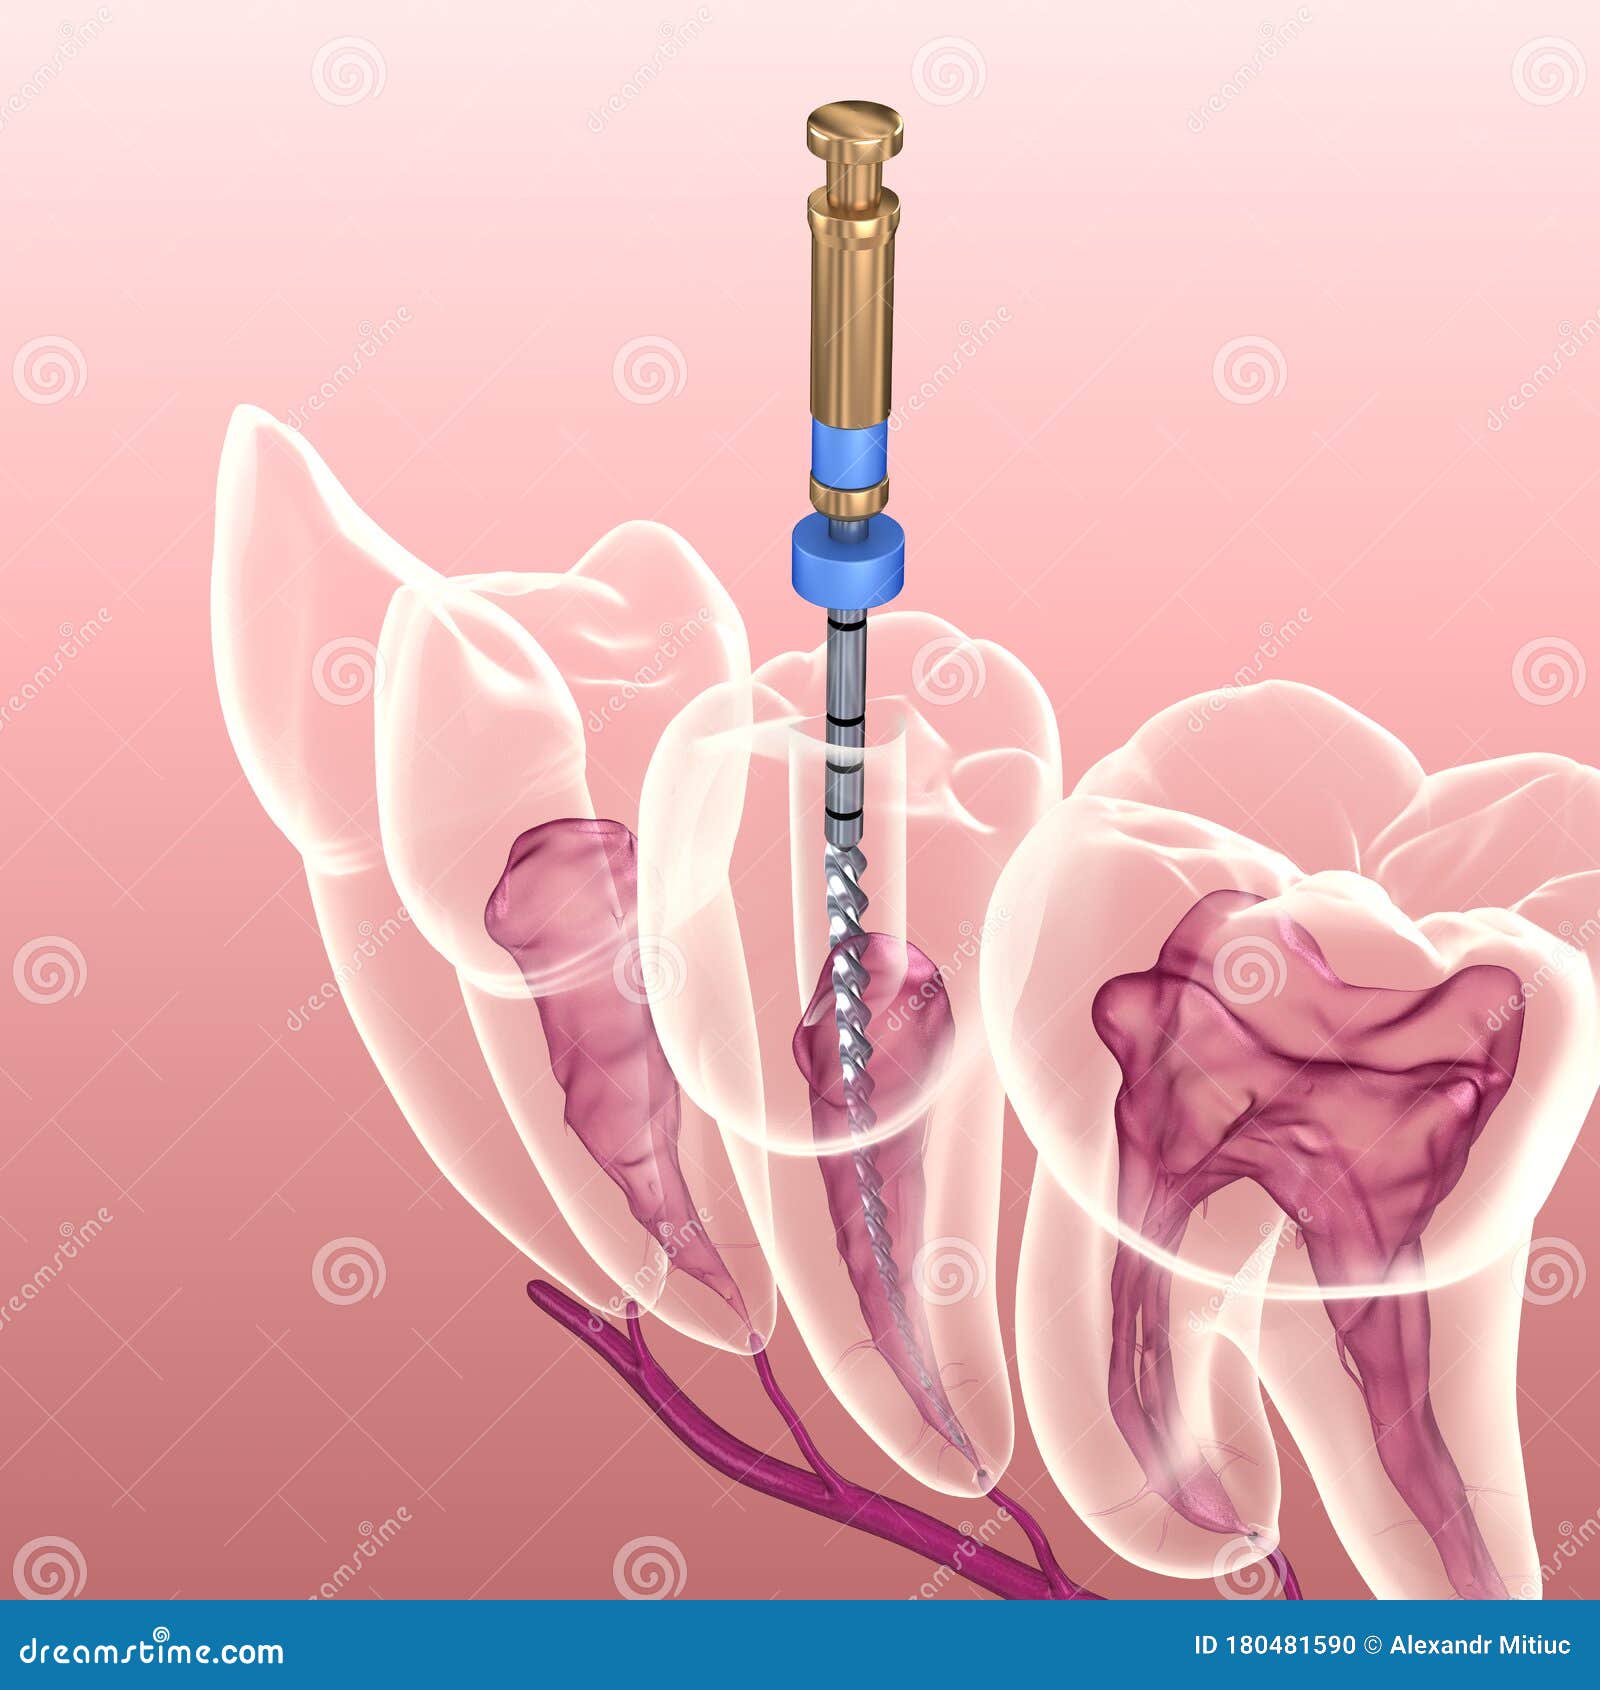 endodontic root canal treatment process. medically accurate tooth 